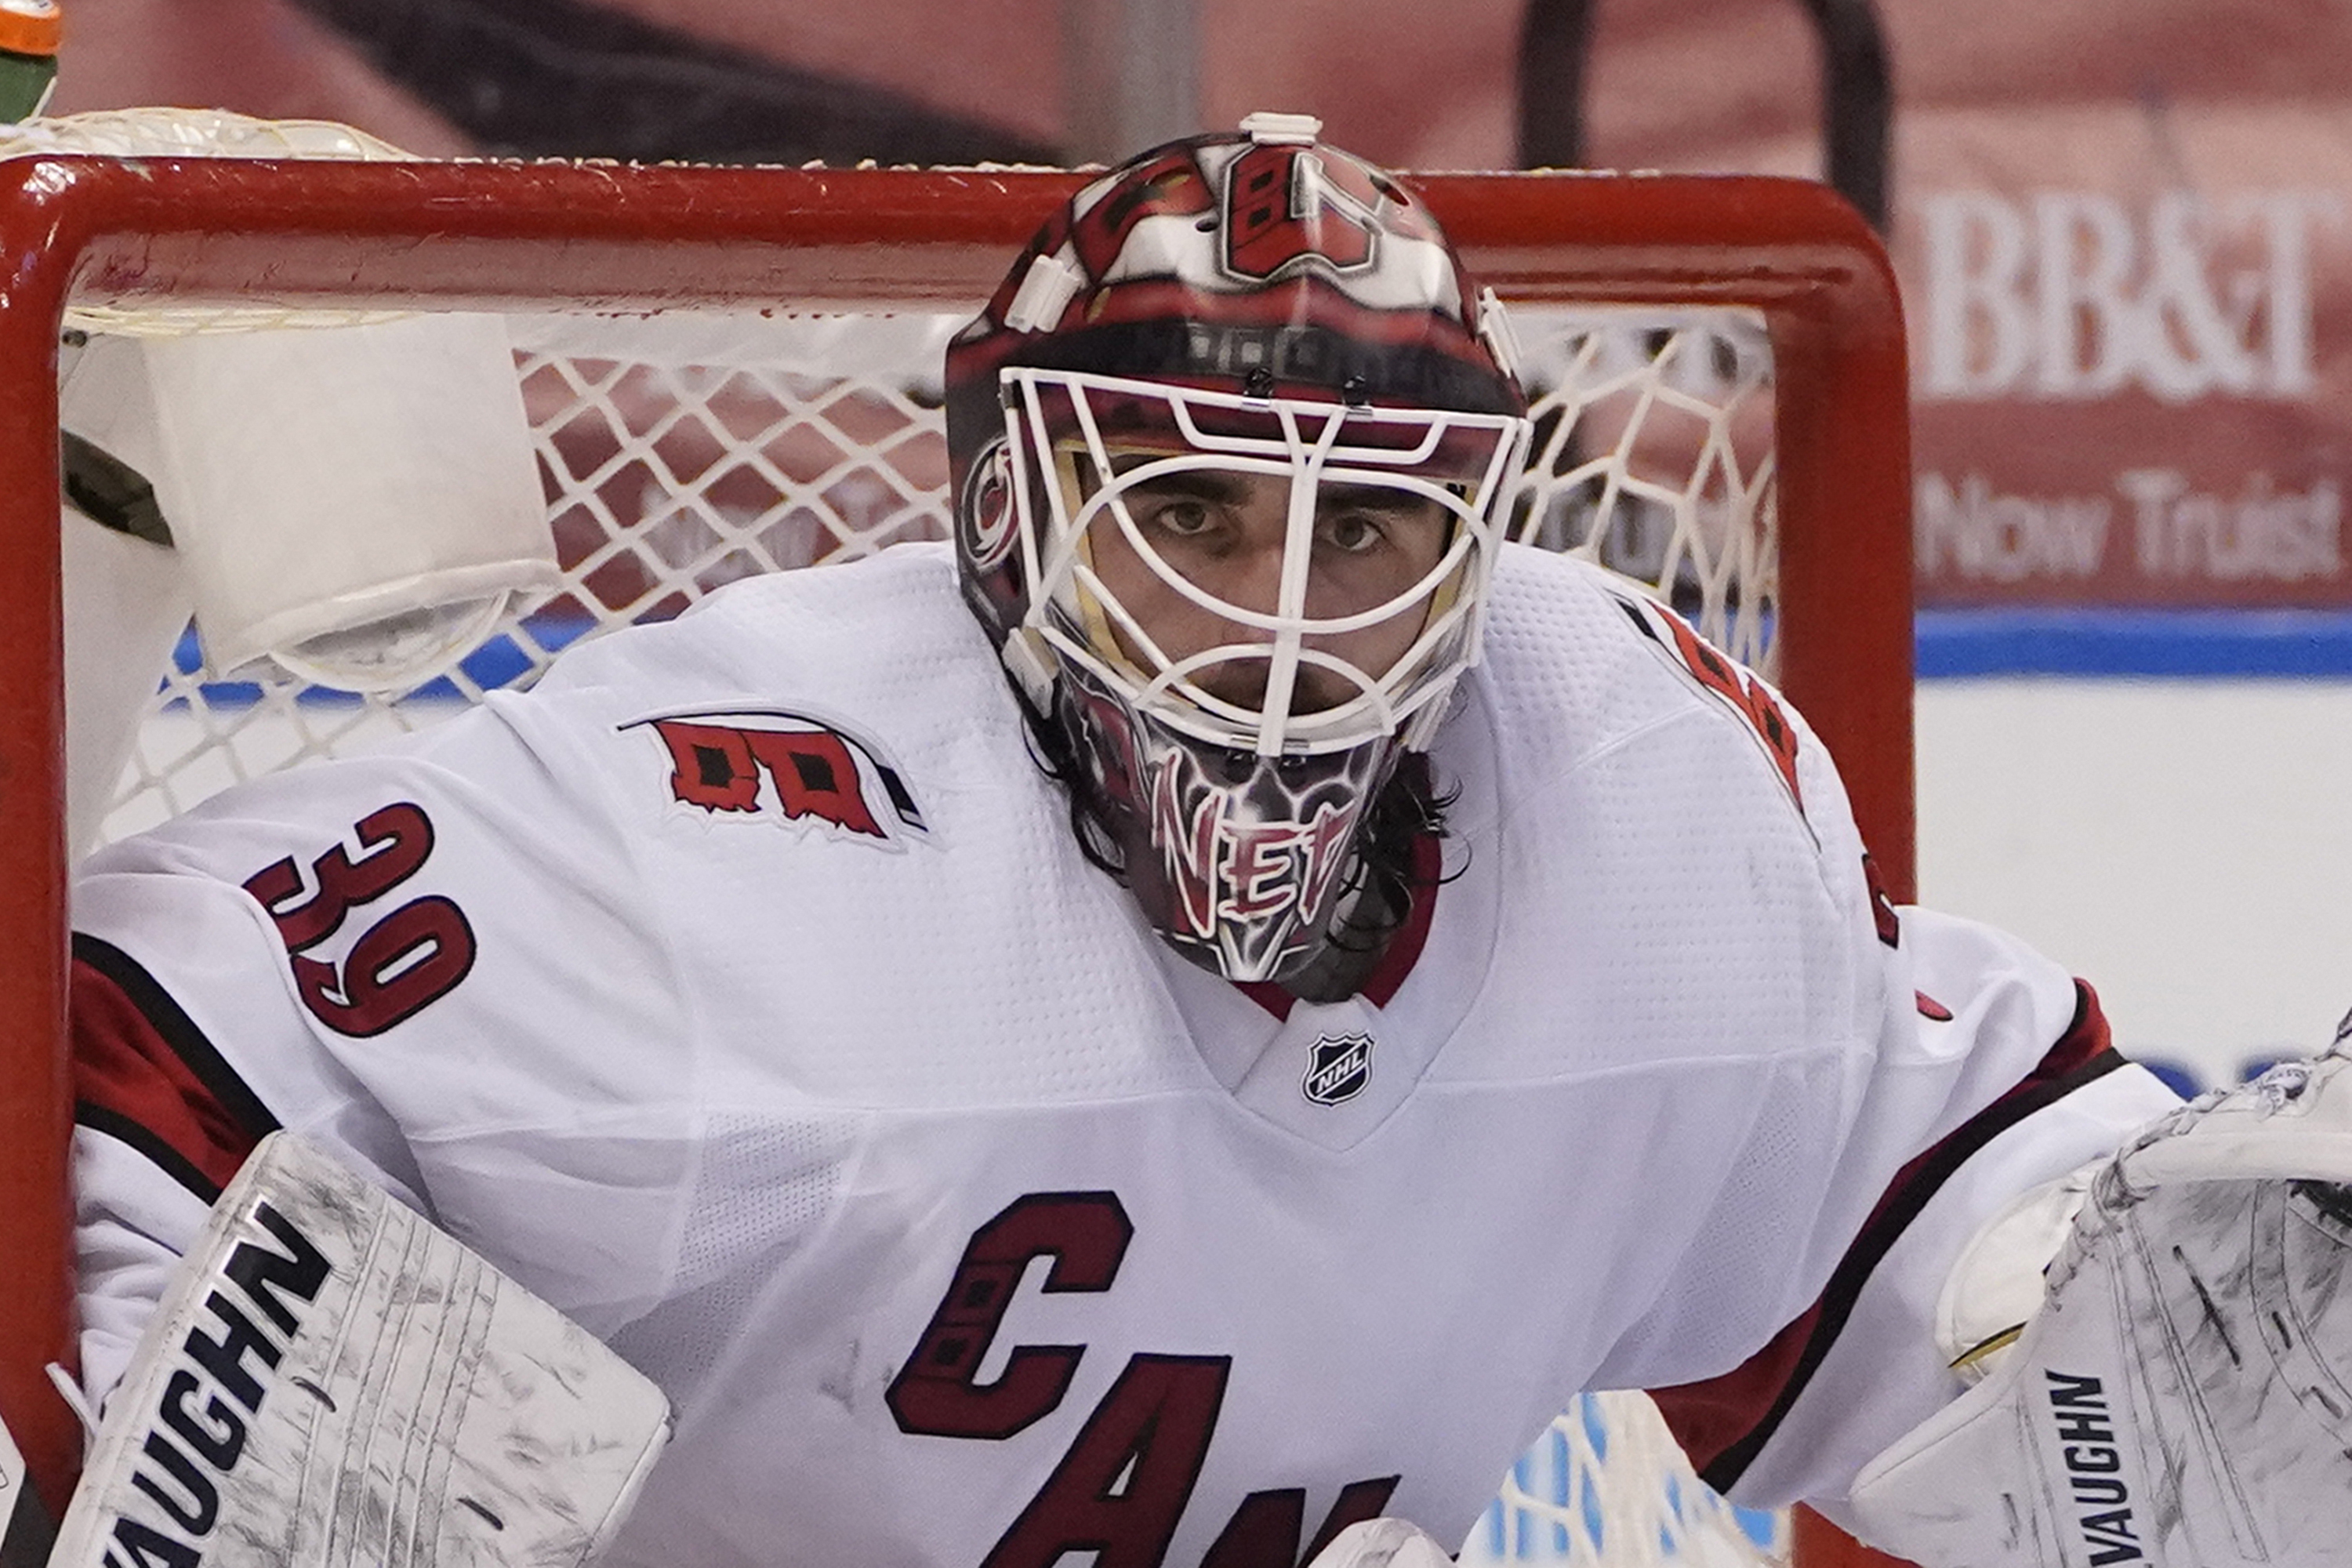 Michigan goalie traded in NHL deal 